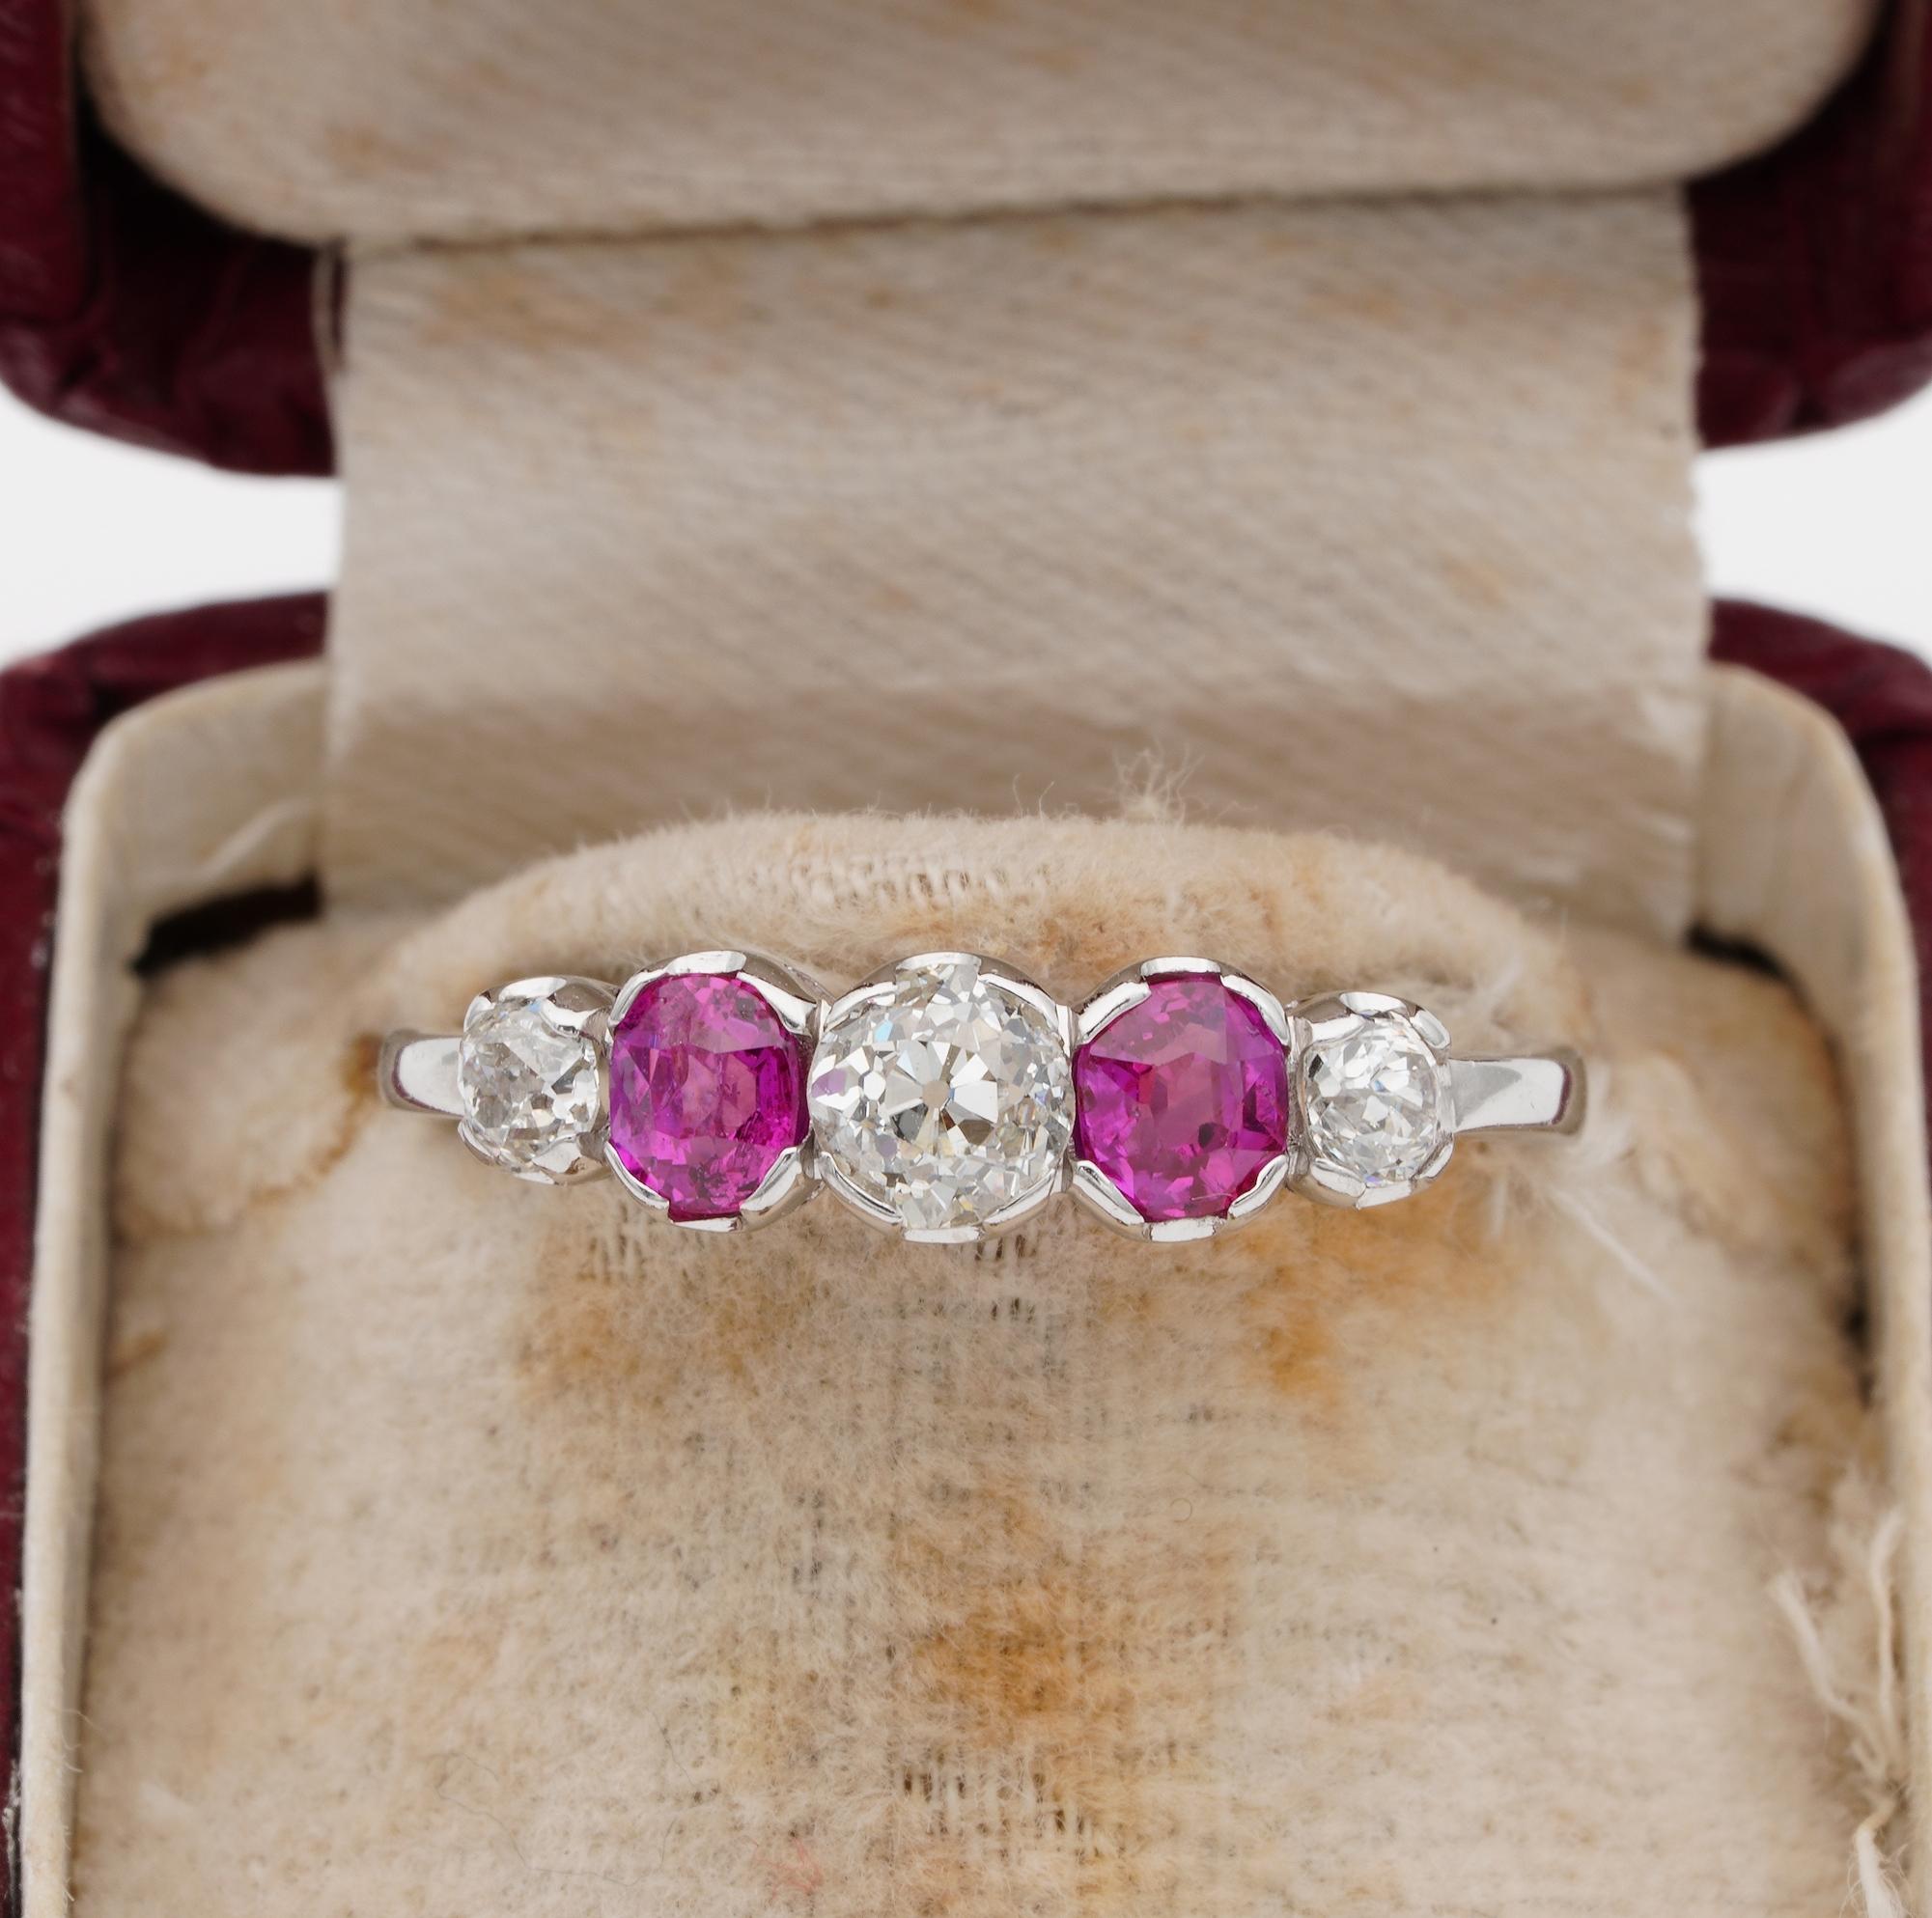 Everlasting Beauty!

A simply stunning Edwardian era five stone ring
A bright and vivacious display of natural gemstones starring on this classy and eternal antique hoop ring very finely hand crafted of solid Platinum not marked during the very